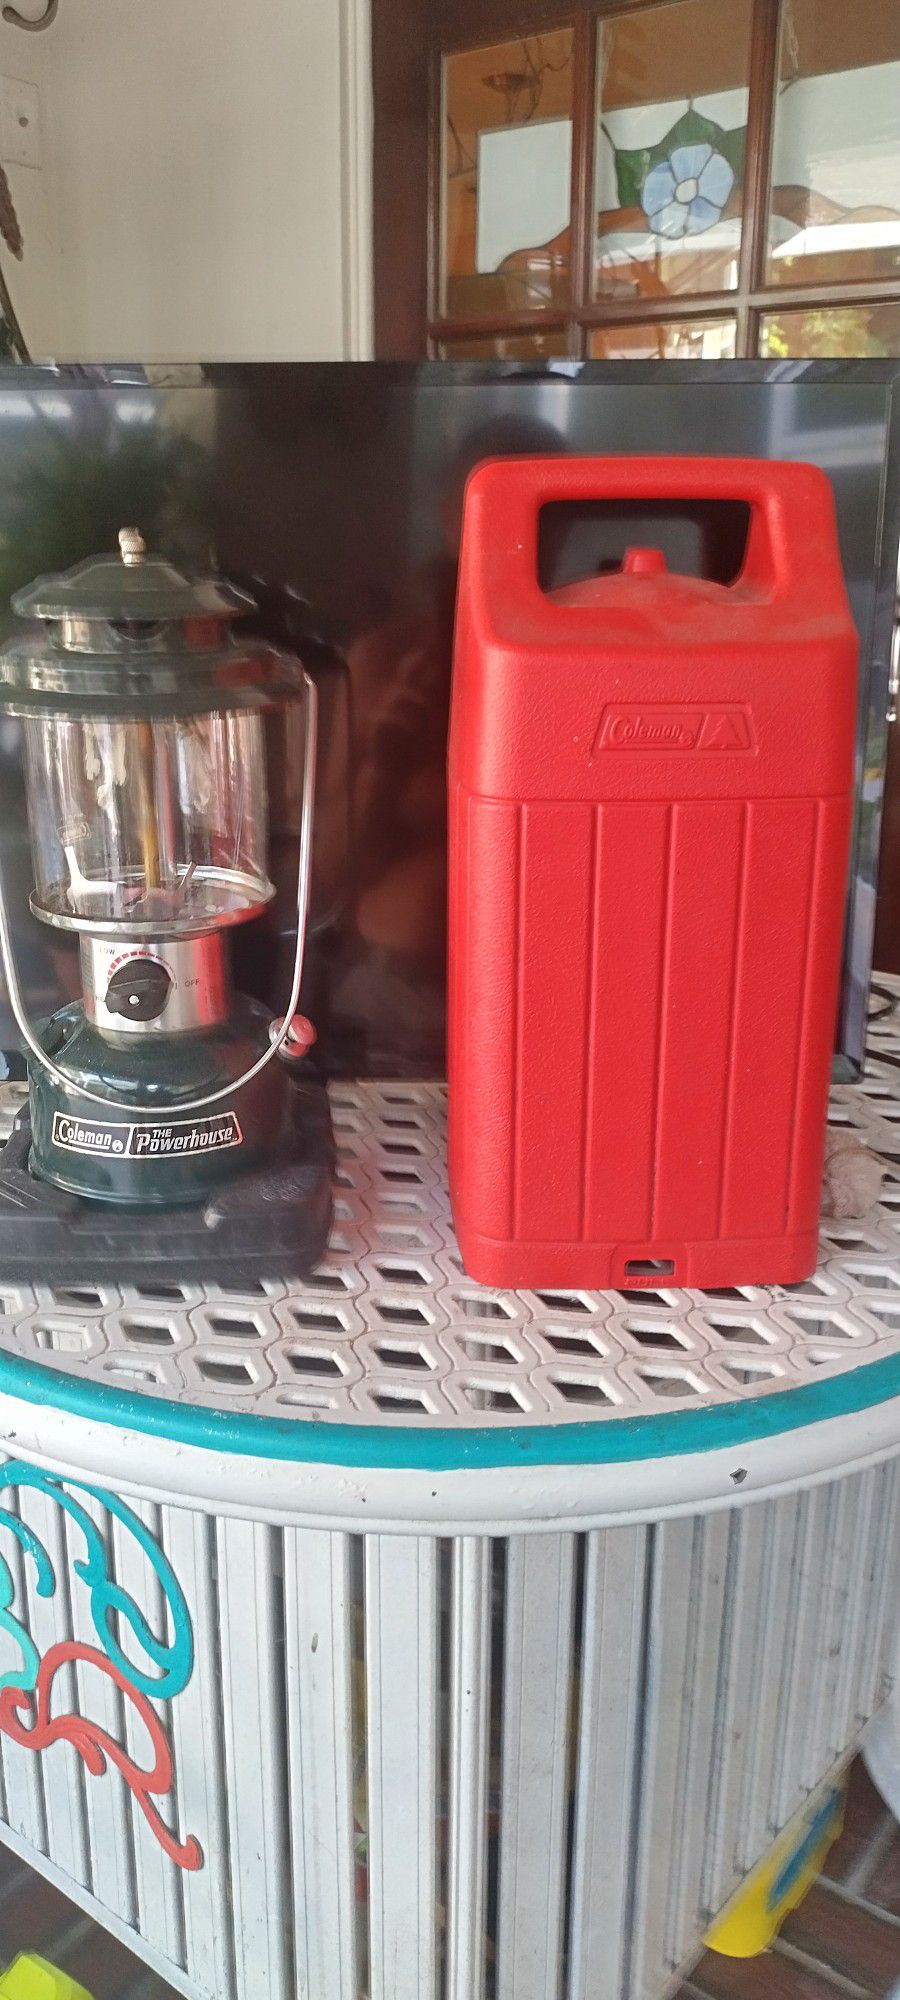 Coleman  The Powerhouse Lantern  With Red Cover Box